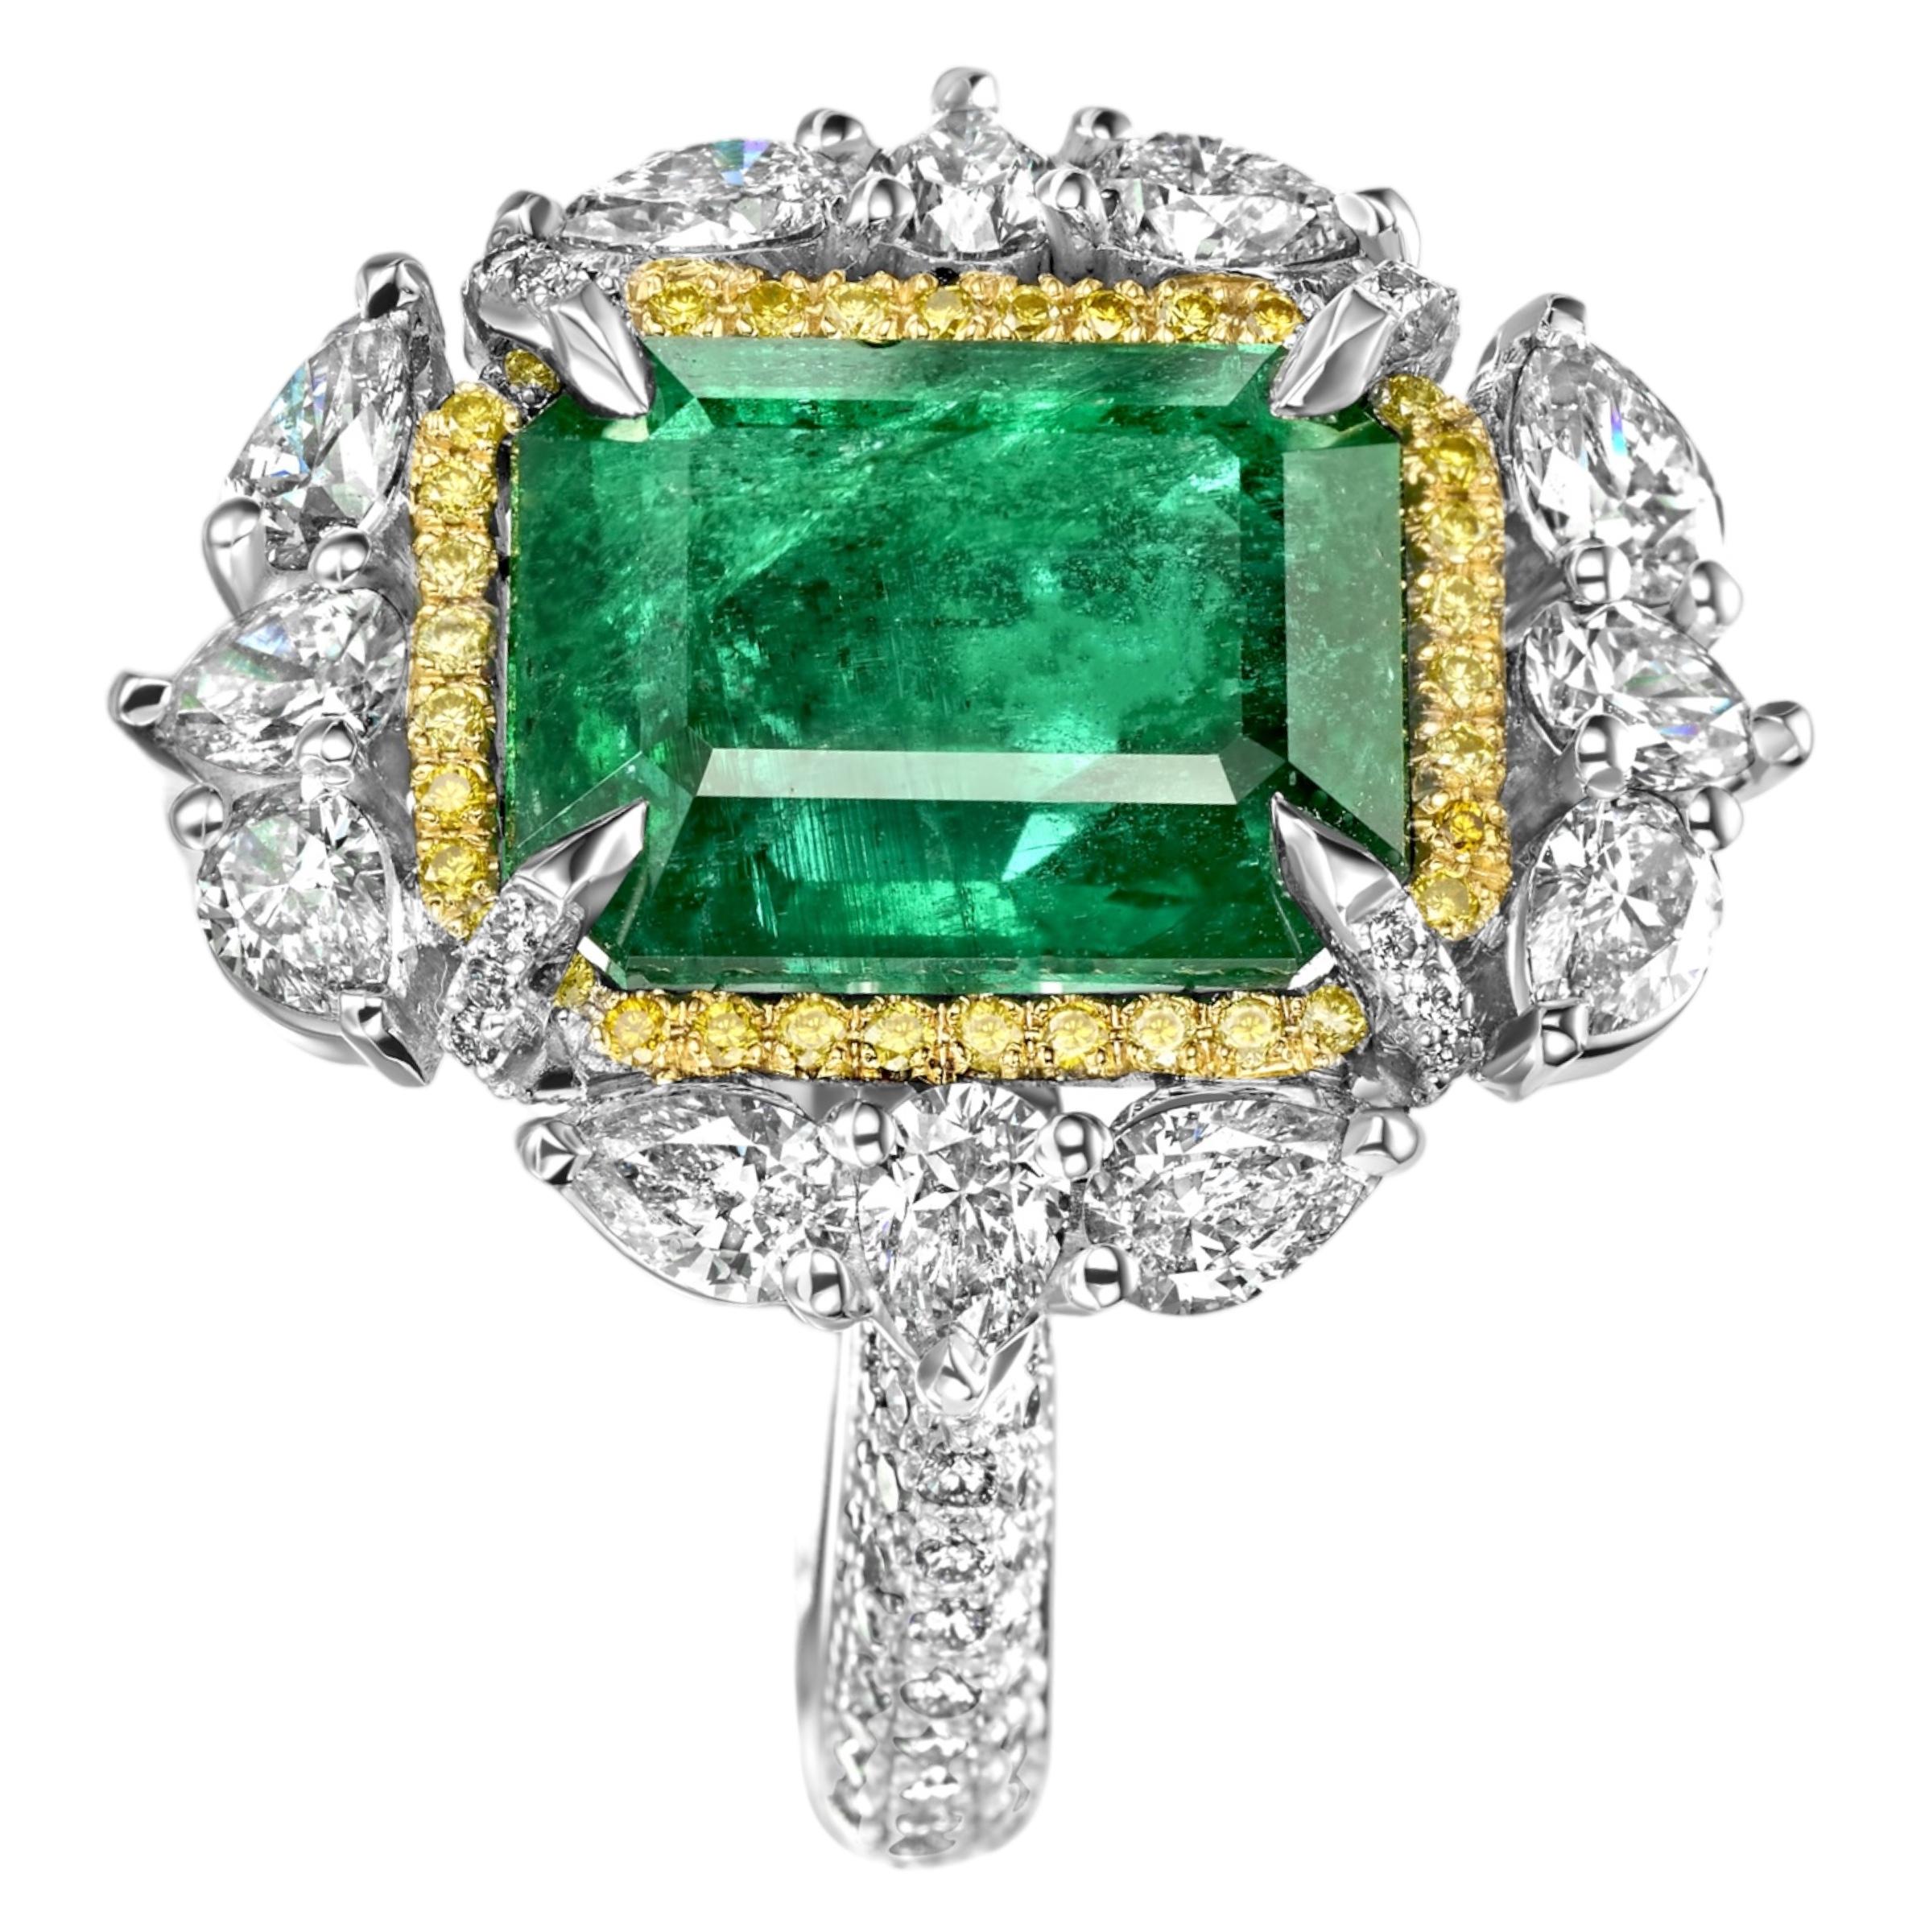 Women's or Men's 18 Karat White Gold Ring with 12.27 Carat Emerald, Pear Shape Diamonds 2.62 Ct For Sale